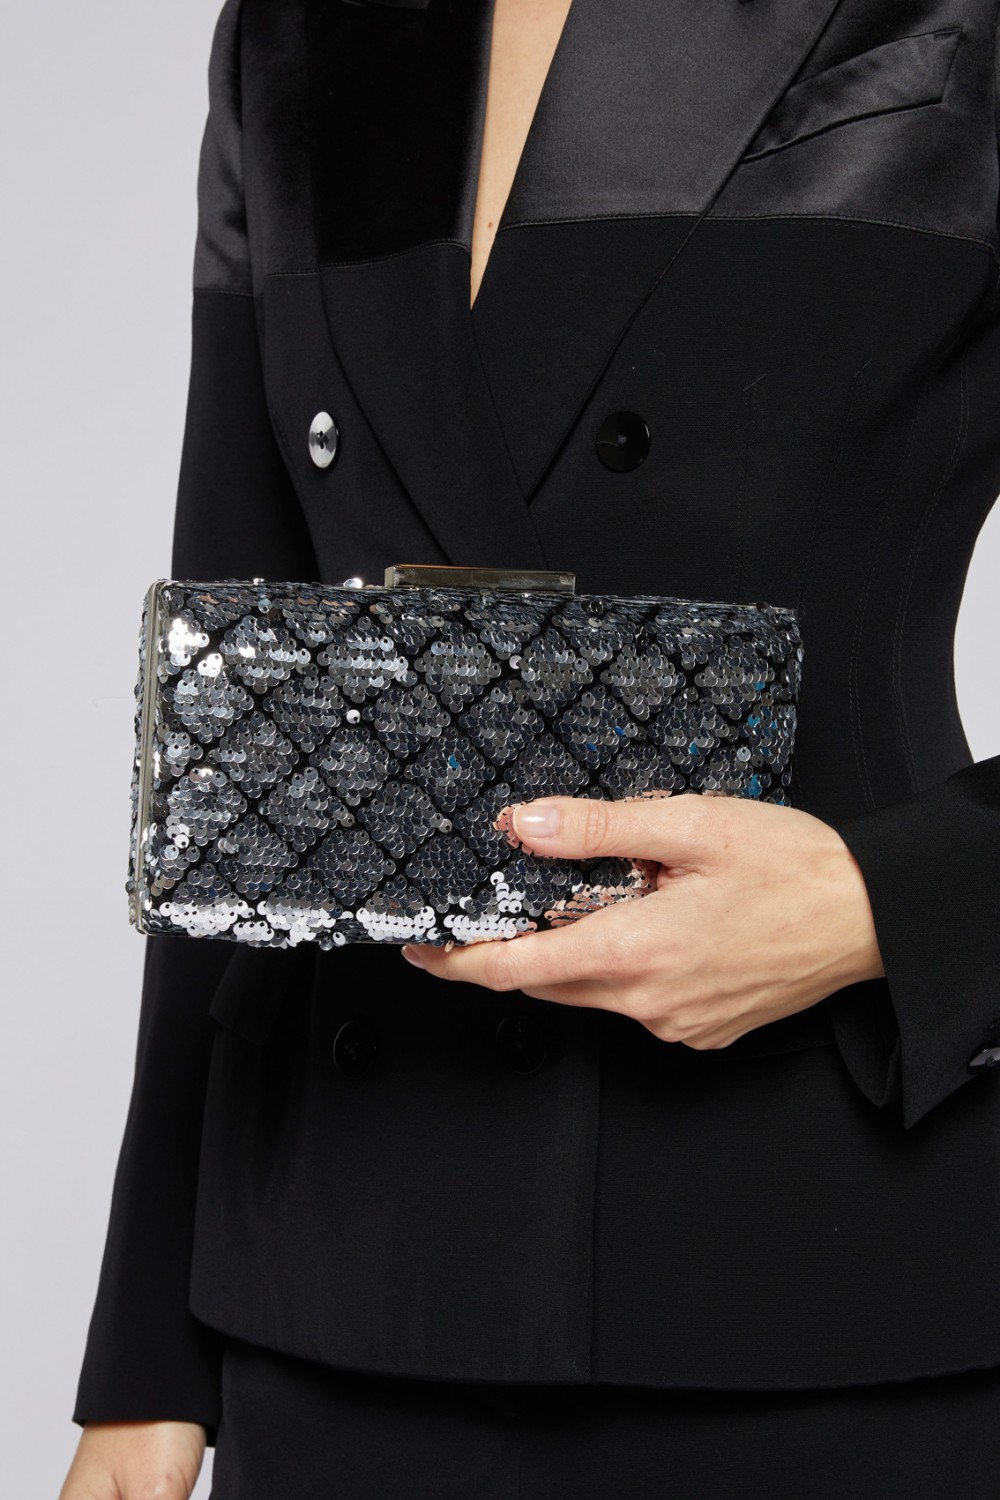 Silver and black clutch